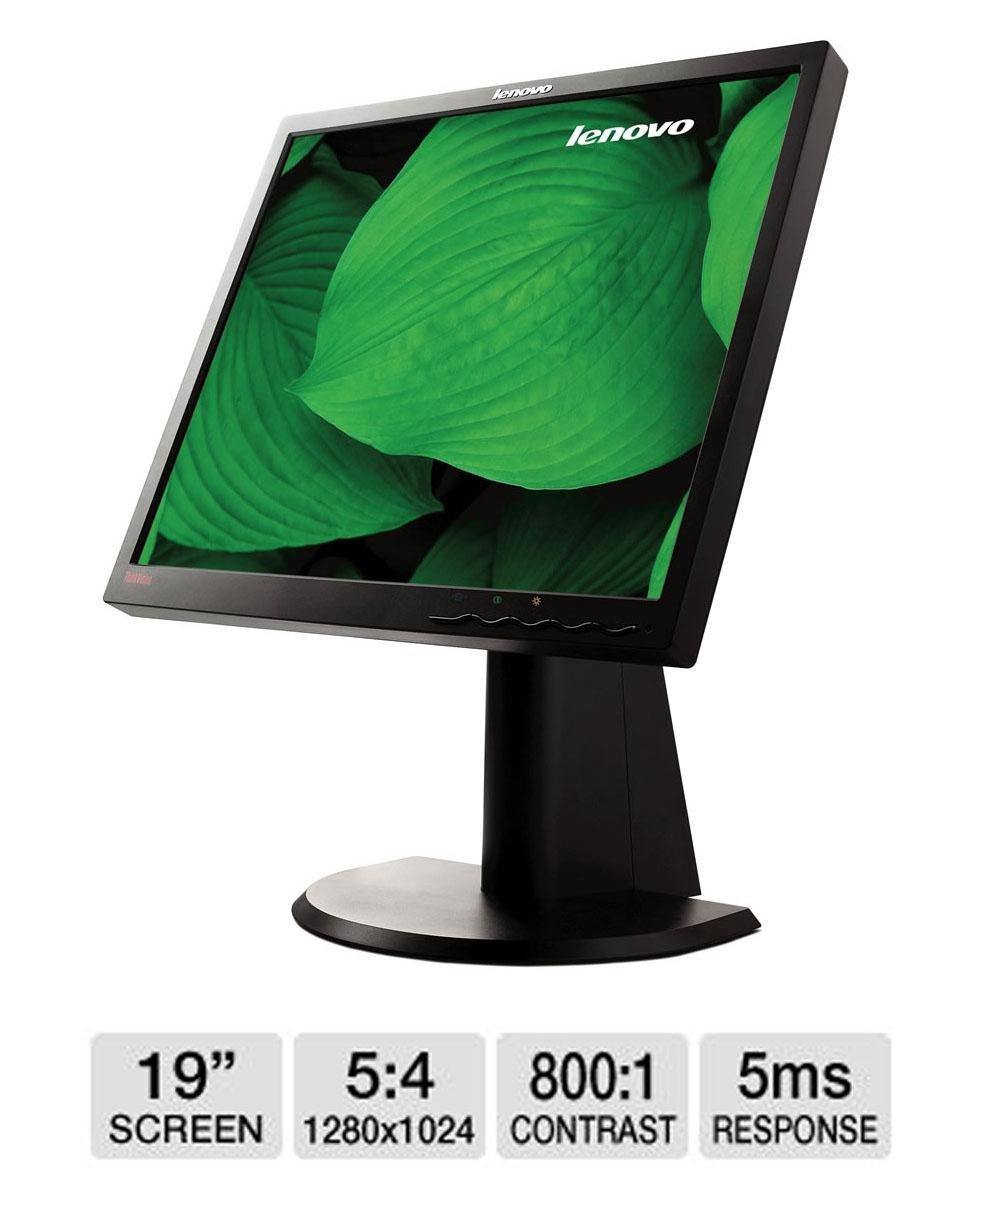 Lenovo ThinkVision L1900p 19-inch Flat Panel LCD Monitor Energy Star (4431-HE1) Used - Atlas Computers & Electronics 